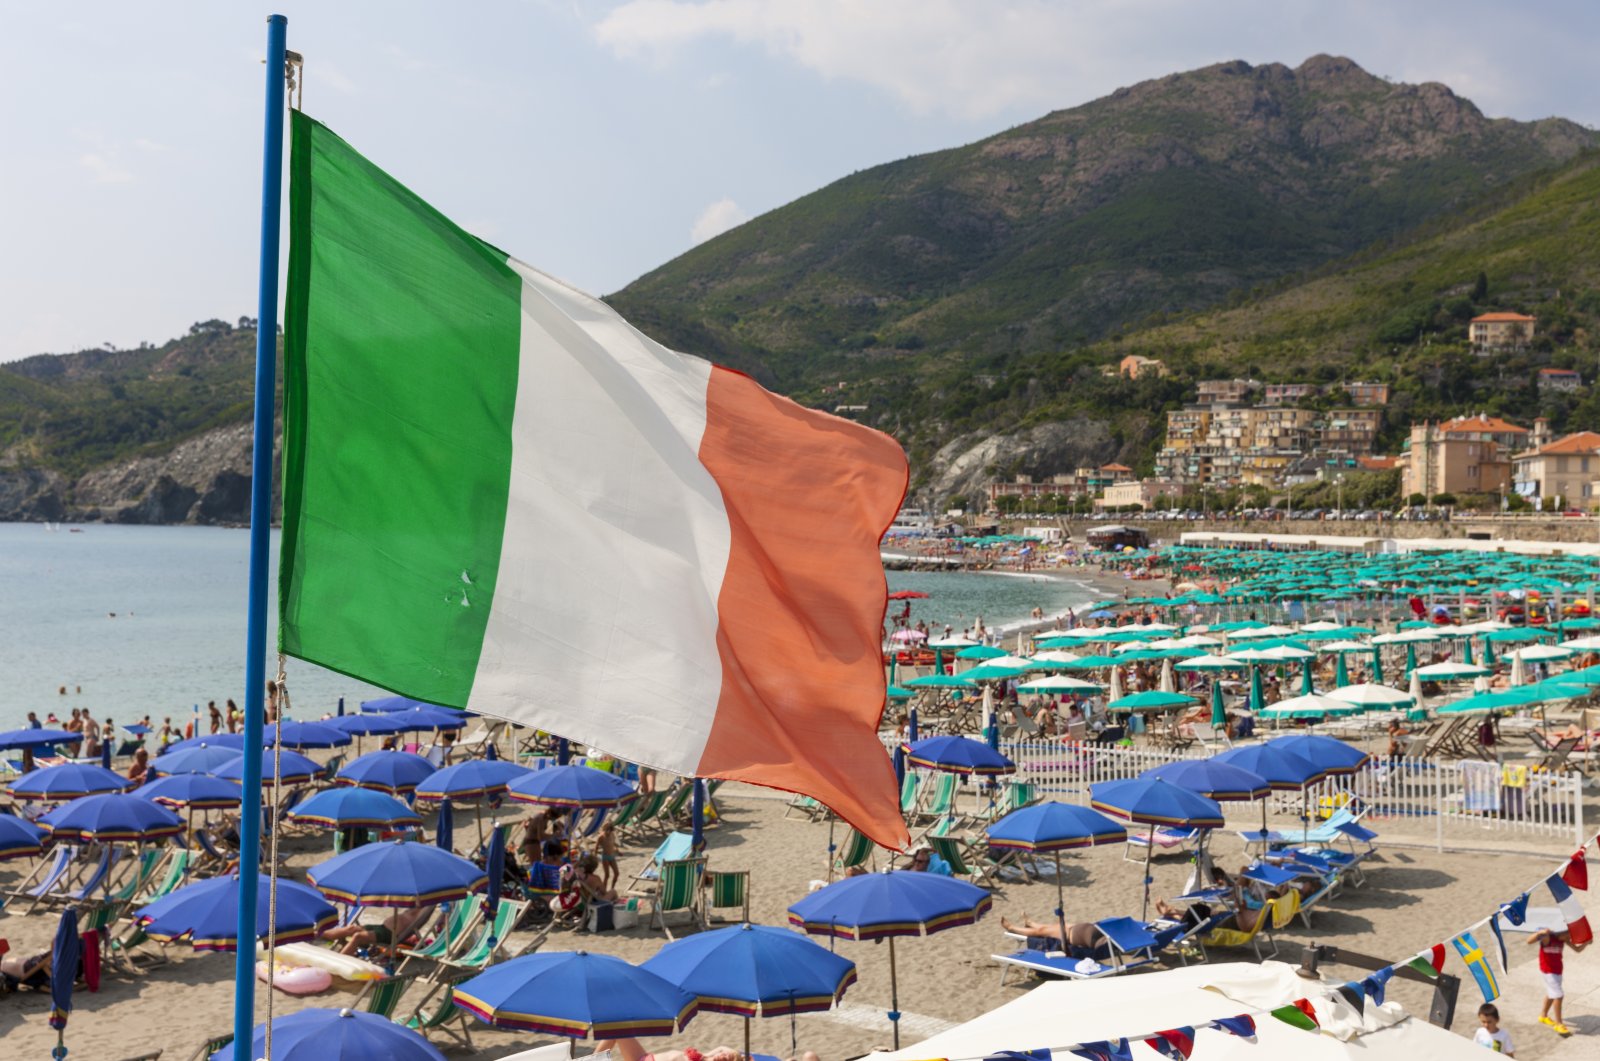 A beach in Levanto, Italy, in this undated file photo. (Getty Images, File Photo)